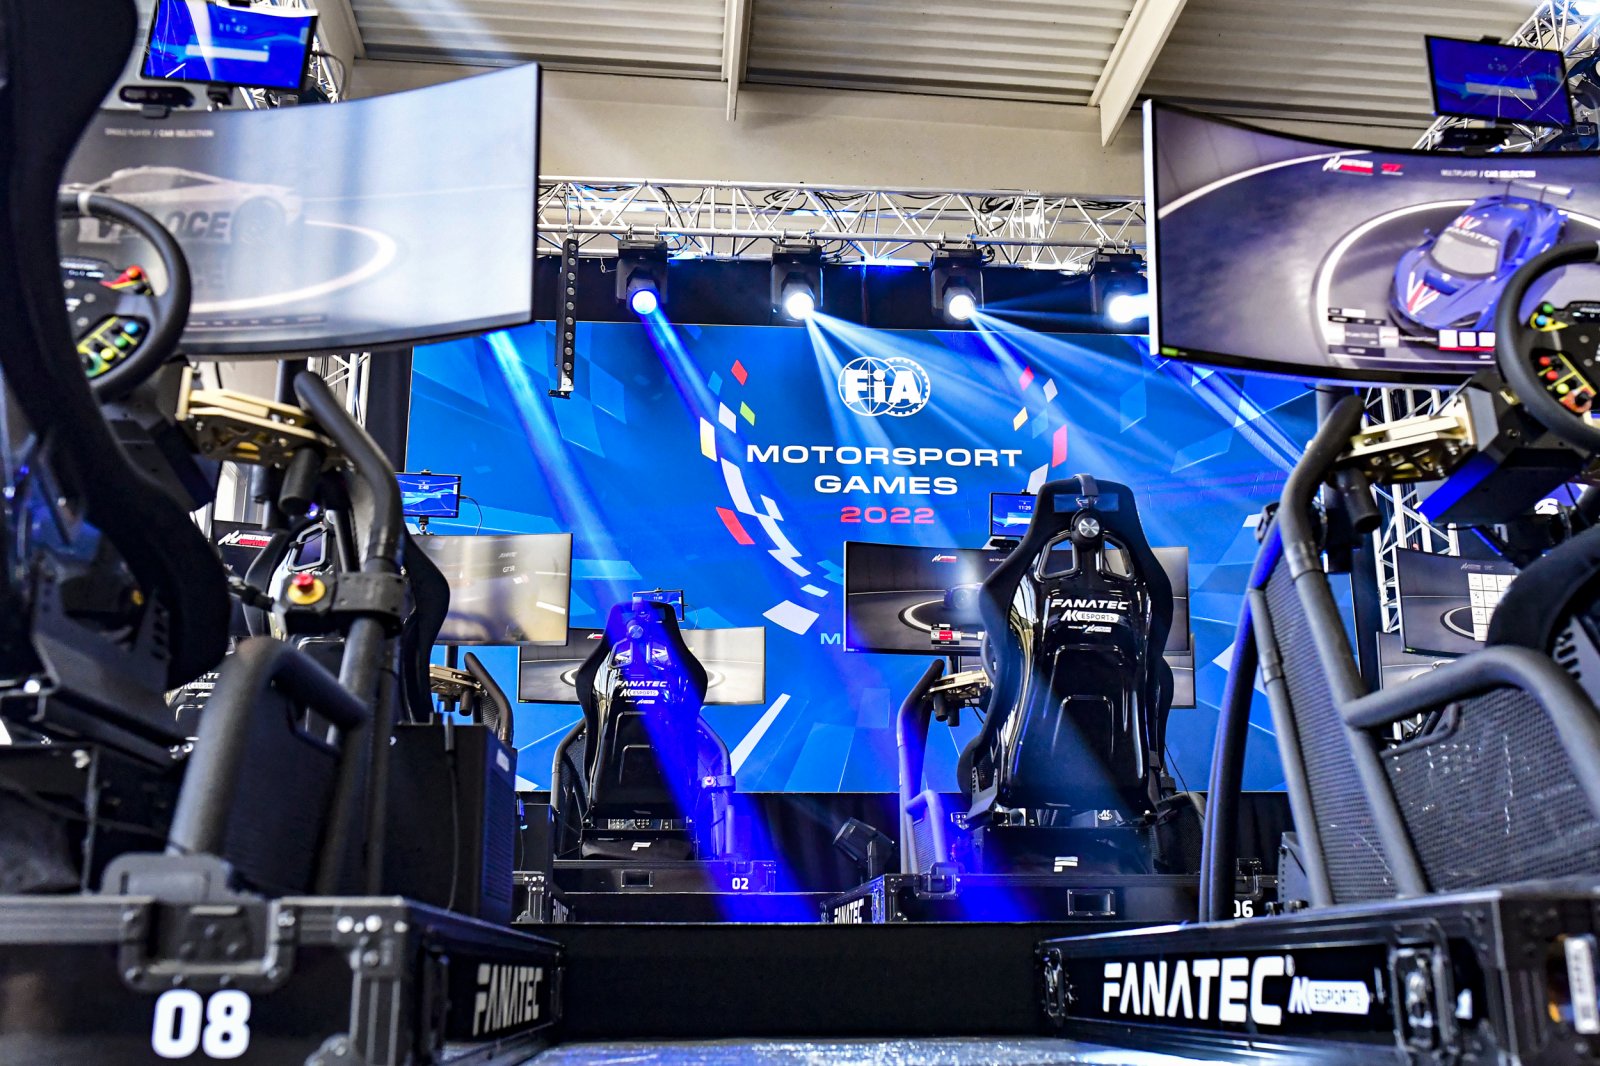 Fanatec Esports: Team Brazil sets the pace in qualifying